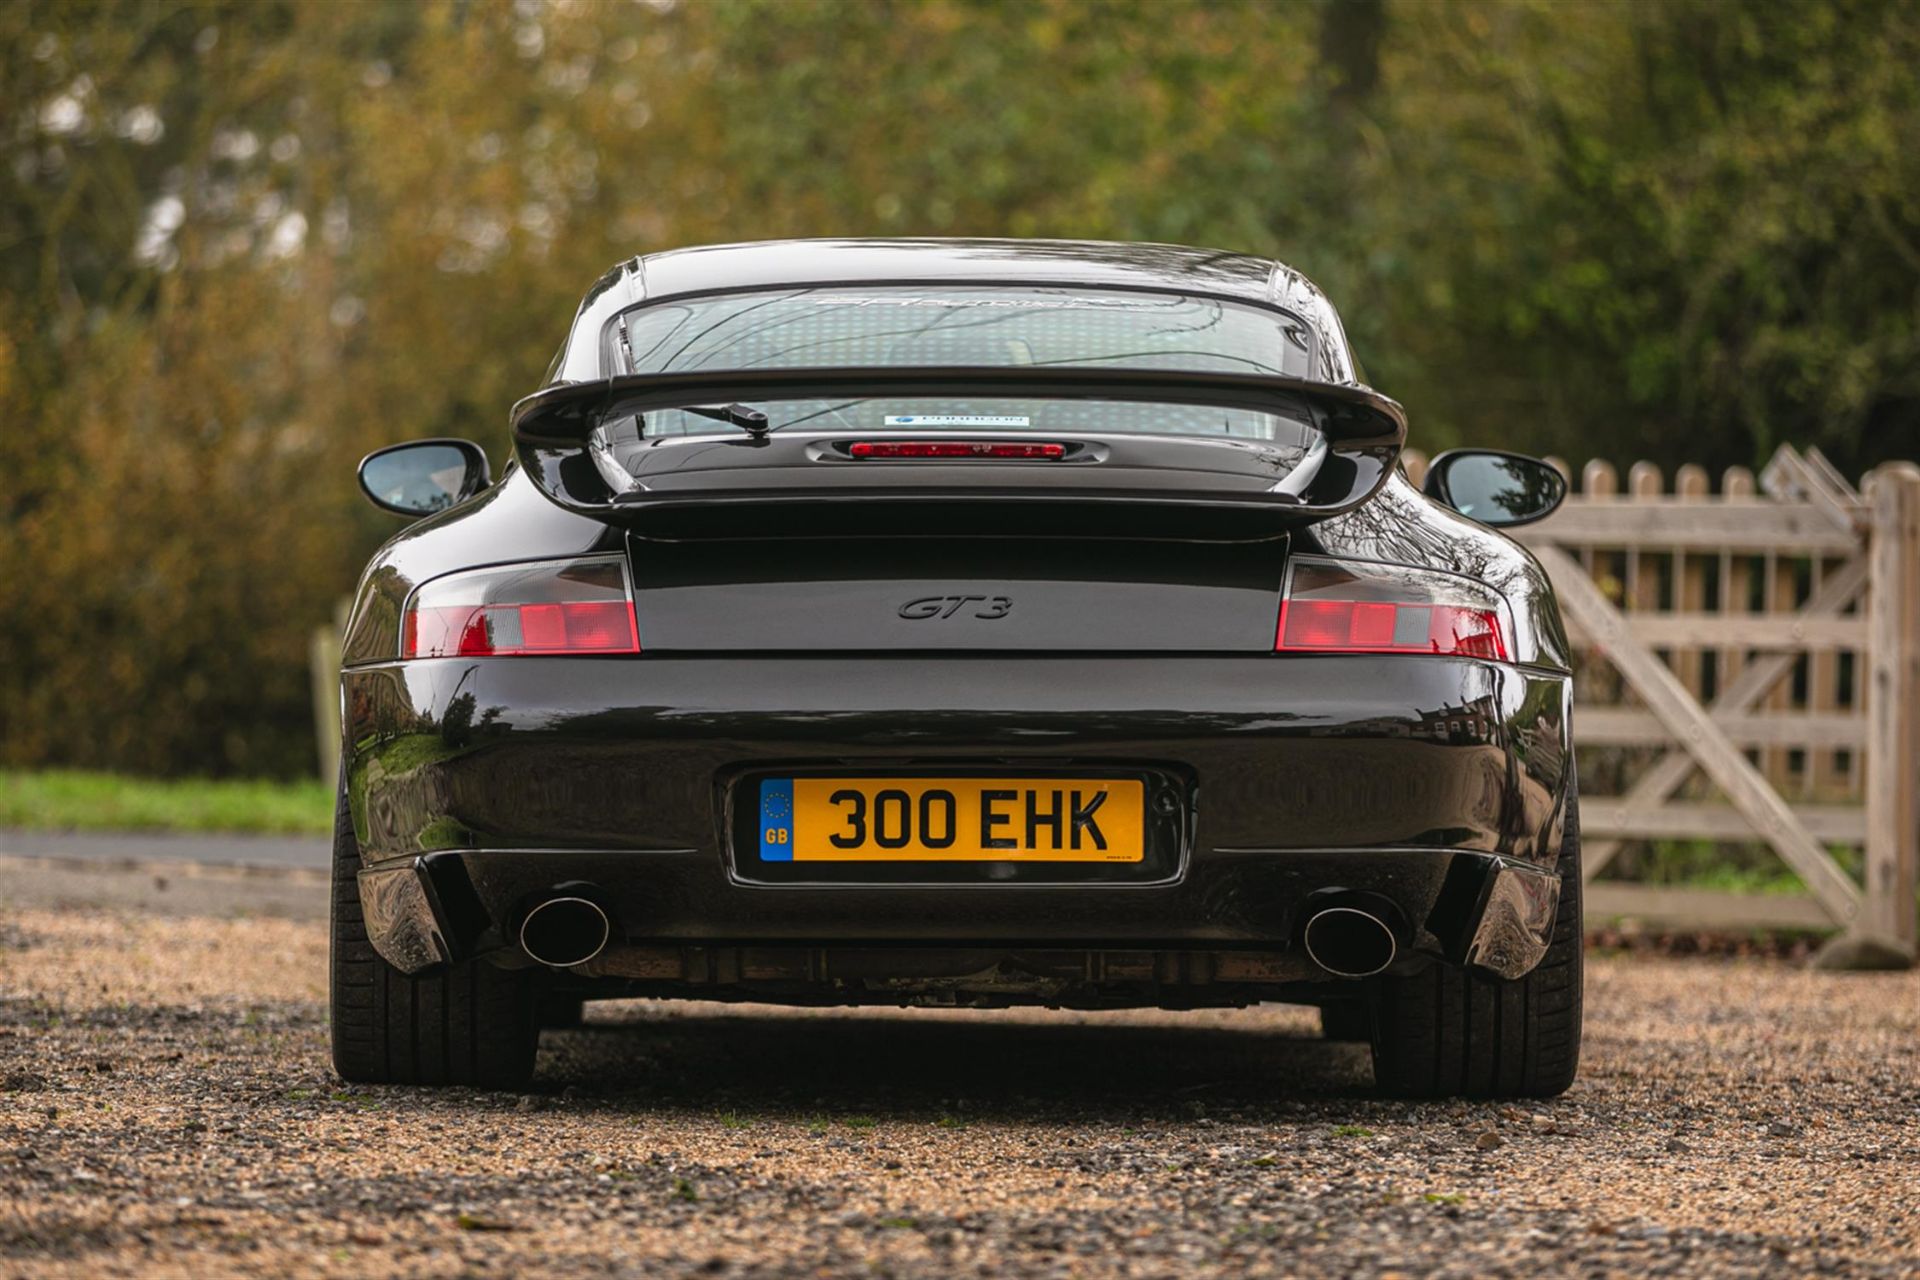 1999 Porsche 911 (996) Carrera (X51) with factory GT3 options - Image 7 of 10